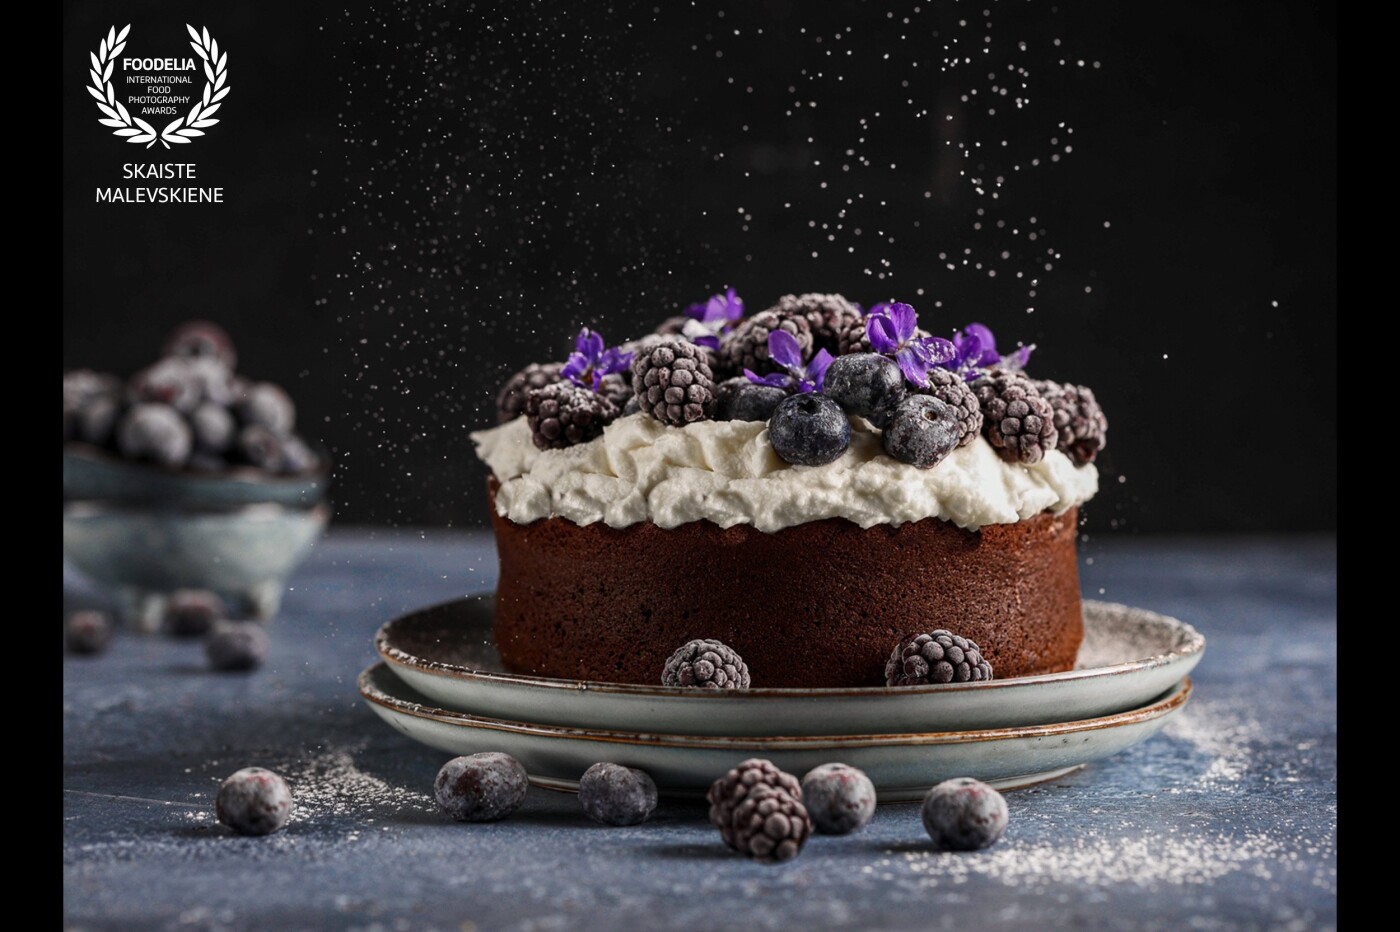 The very first blossoms in my garden this year were these little purple pansies. I had to make something special and beautiful with it. And here is the result - chocolate cake with whipped cream, blueberries and my beautiful pansies.